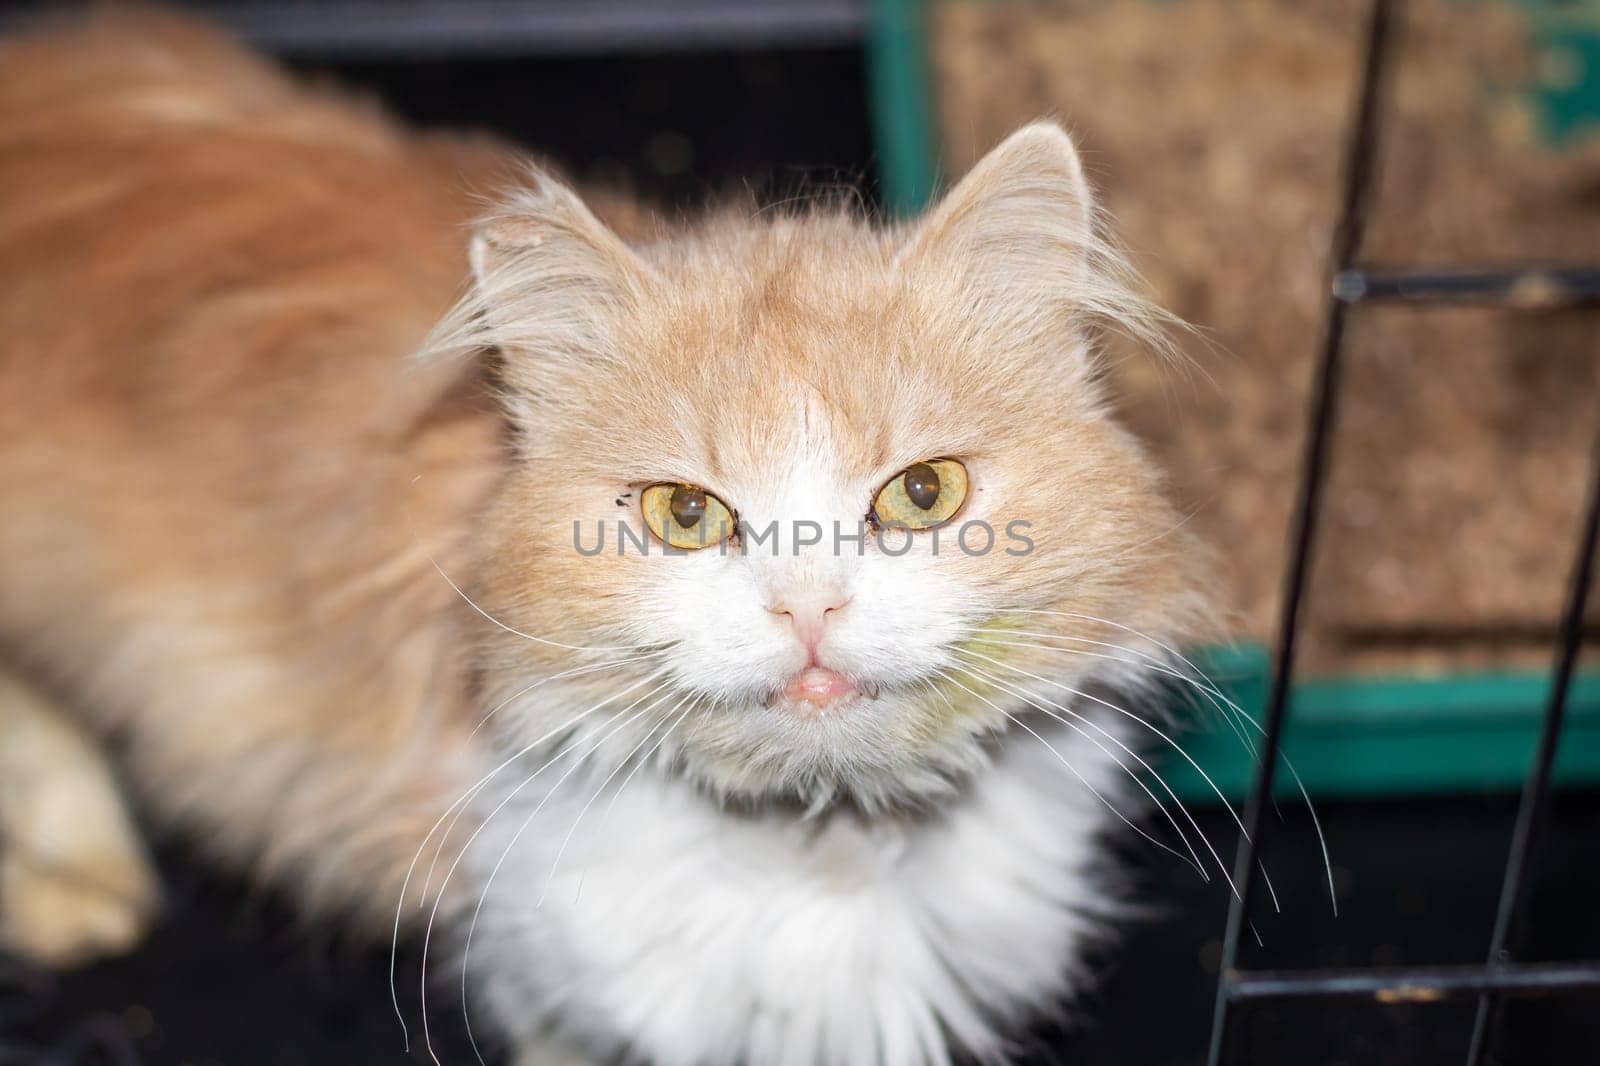 A domestic shorthaired cat with fluffy orange and white fur and whiskers is gazing curiously at the camera, showcasing typical traits of small to mediumsized cats in the Felidae family